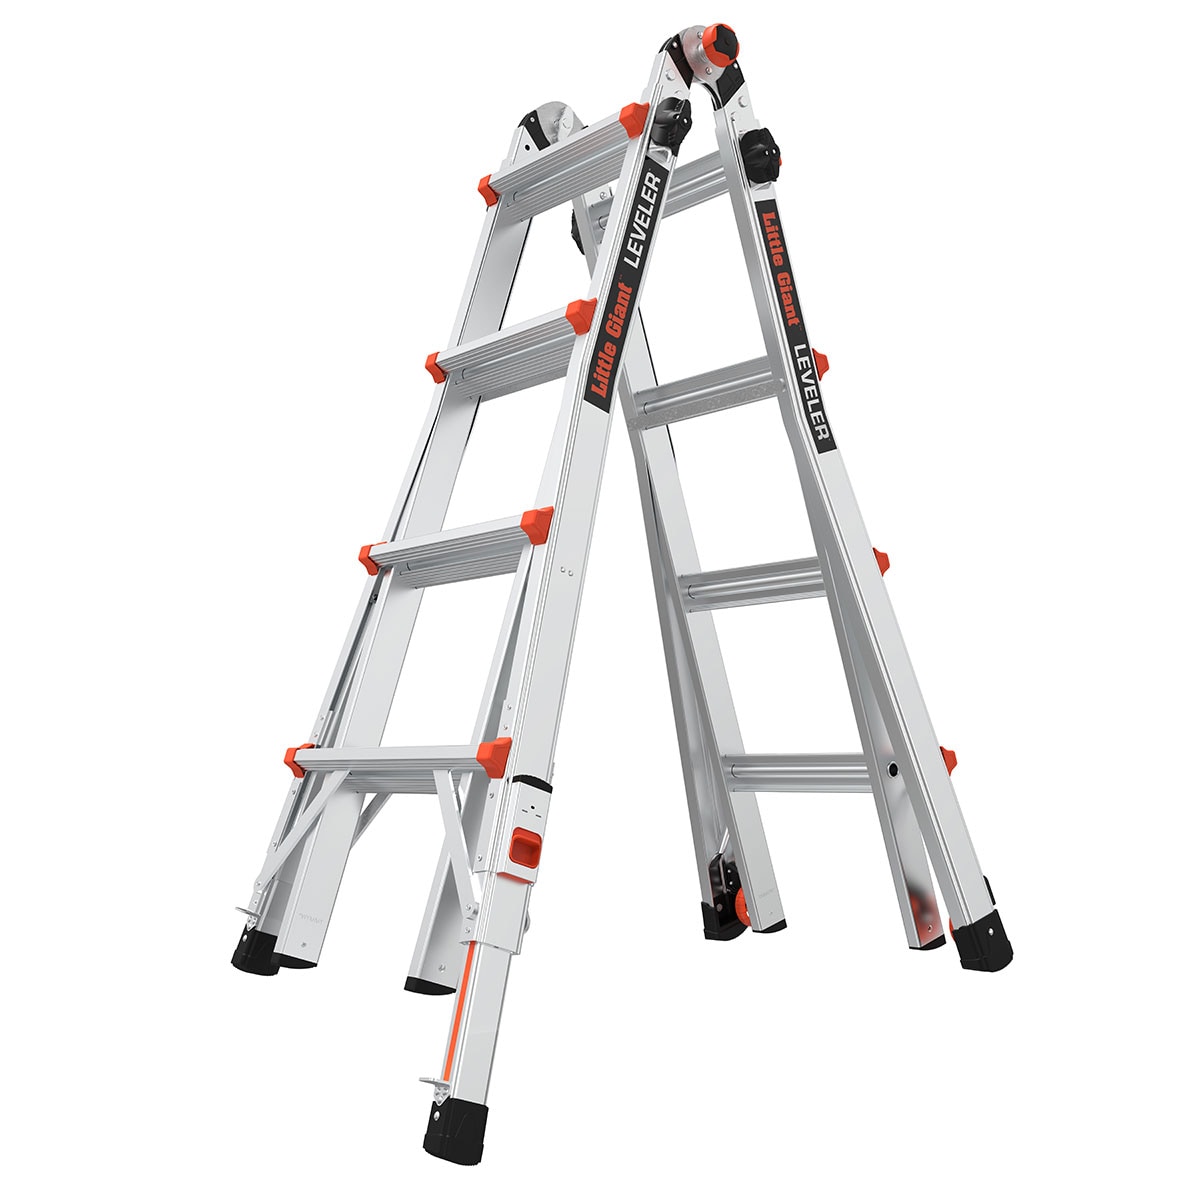 Velocity with Wheels Little Giant Ladders Assorted Size Names Styles M26 